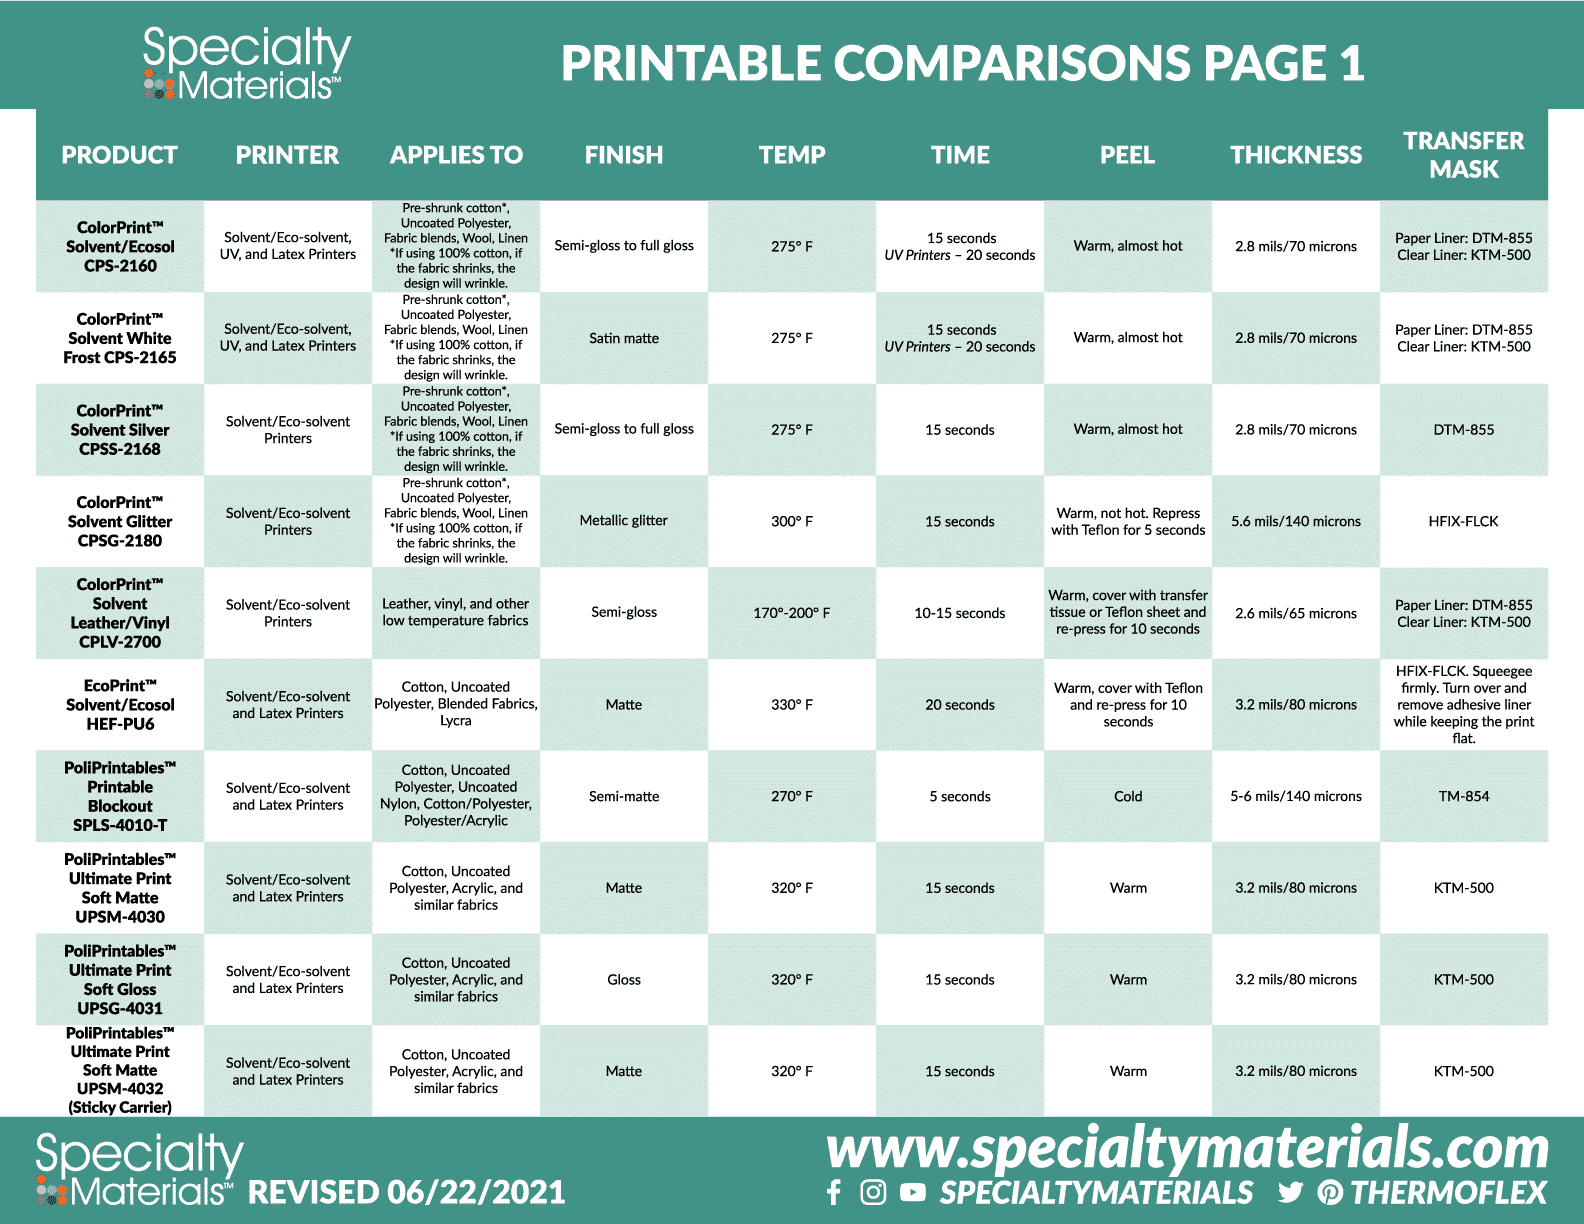 A printable image of the above printable comparison information, the first page